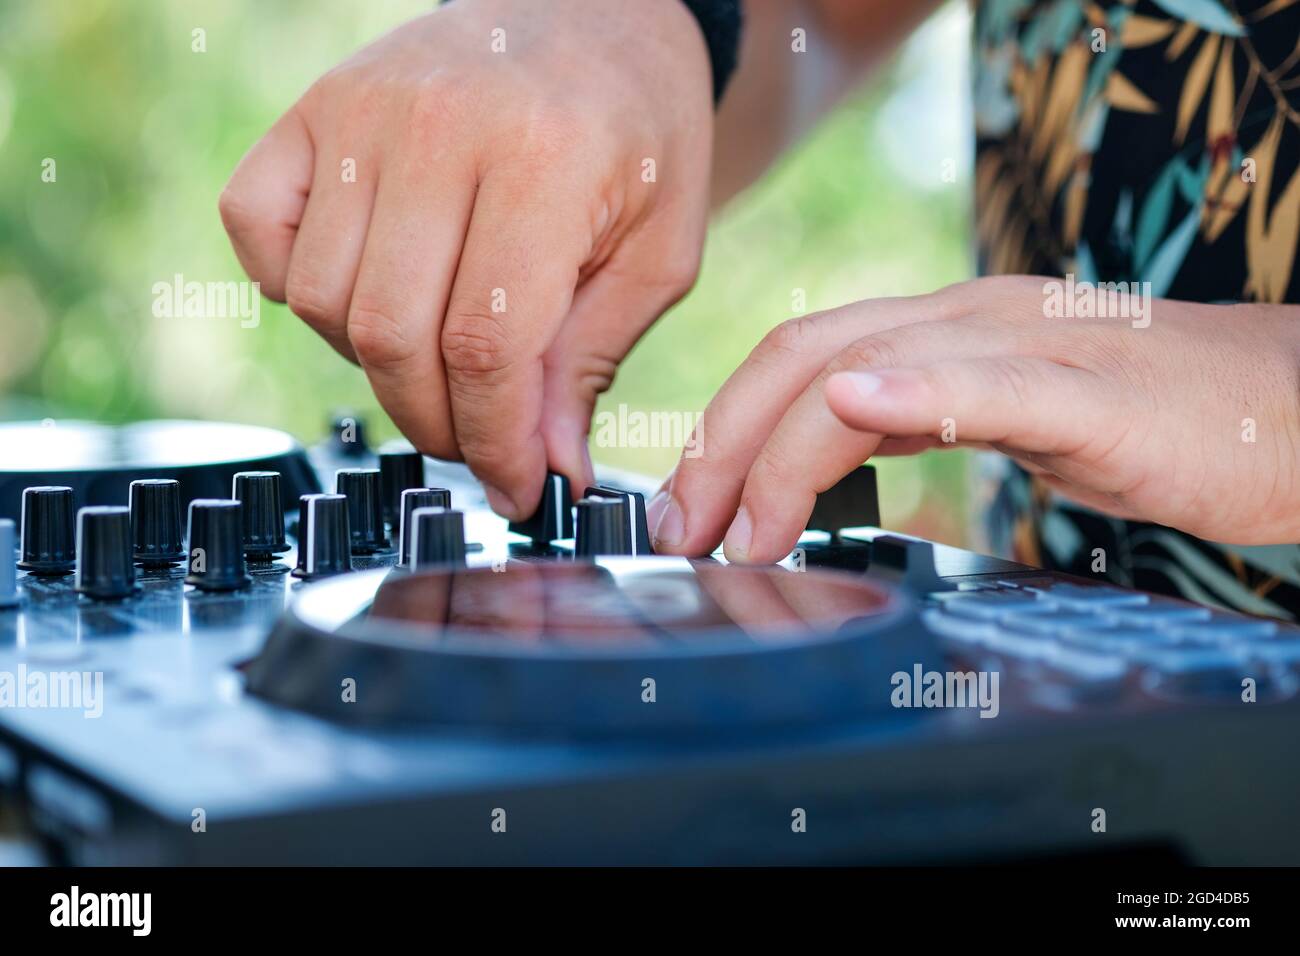 DJ Hands creating and regulating music on dj console mixer in beach club stage.  Stock Photo